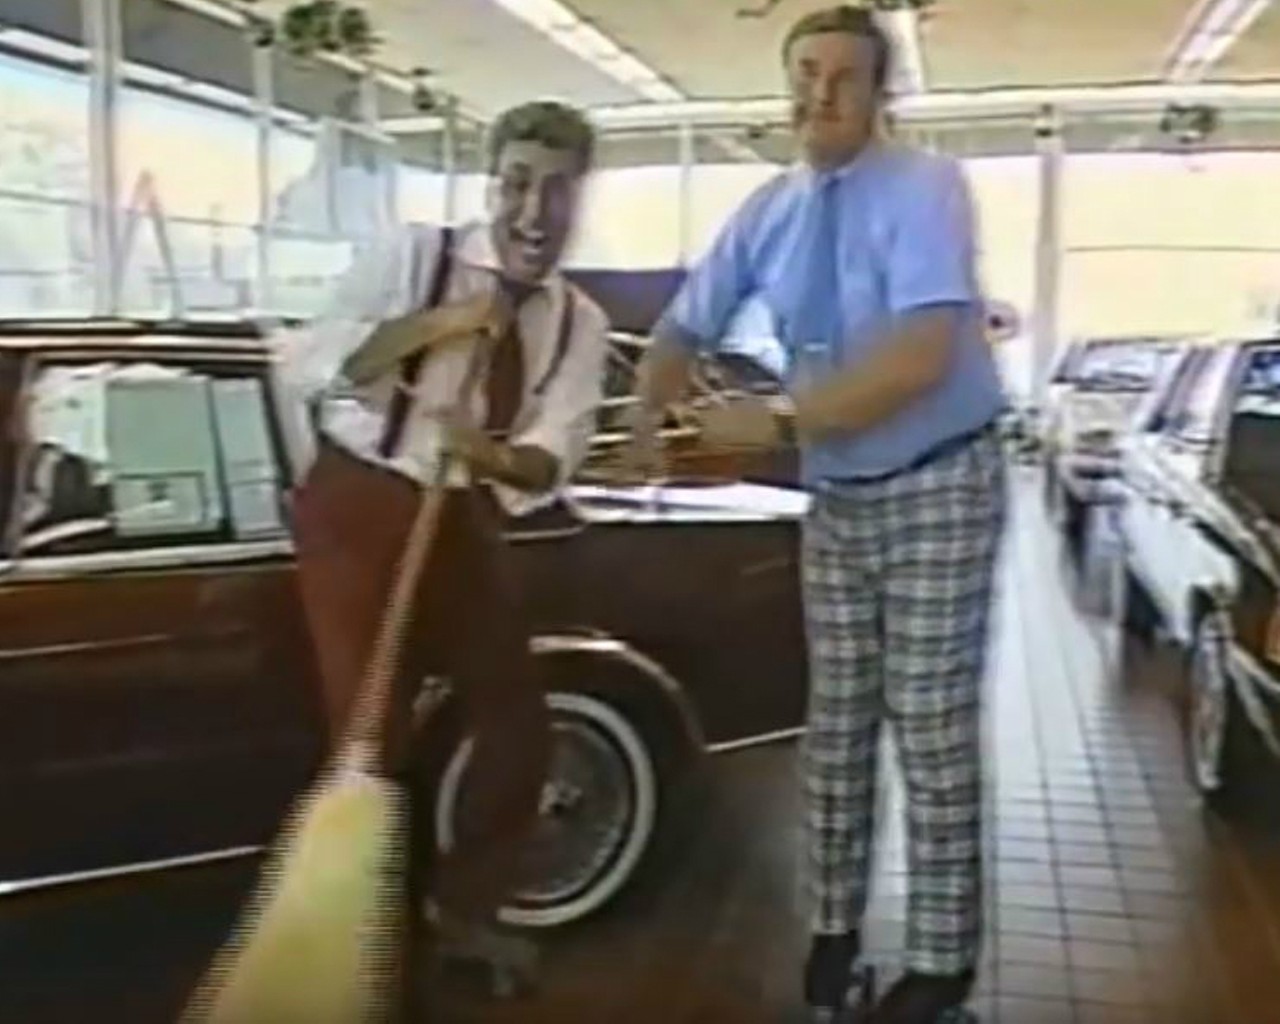 Steve Mizerany
The original king of local commercials
Photo credit: screengrab from YouTube